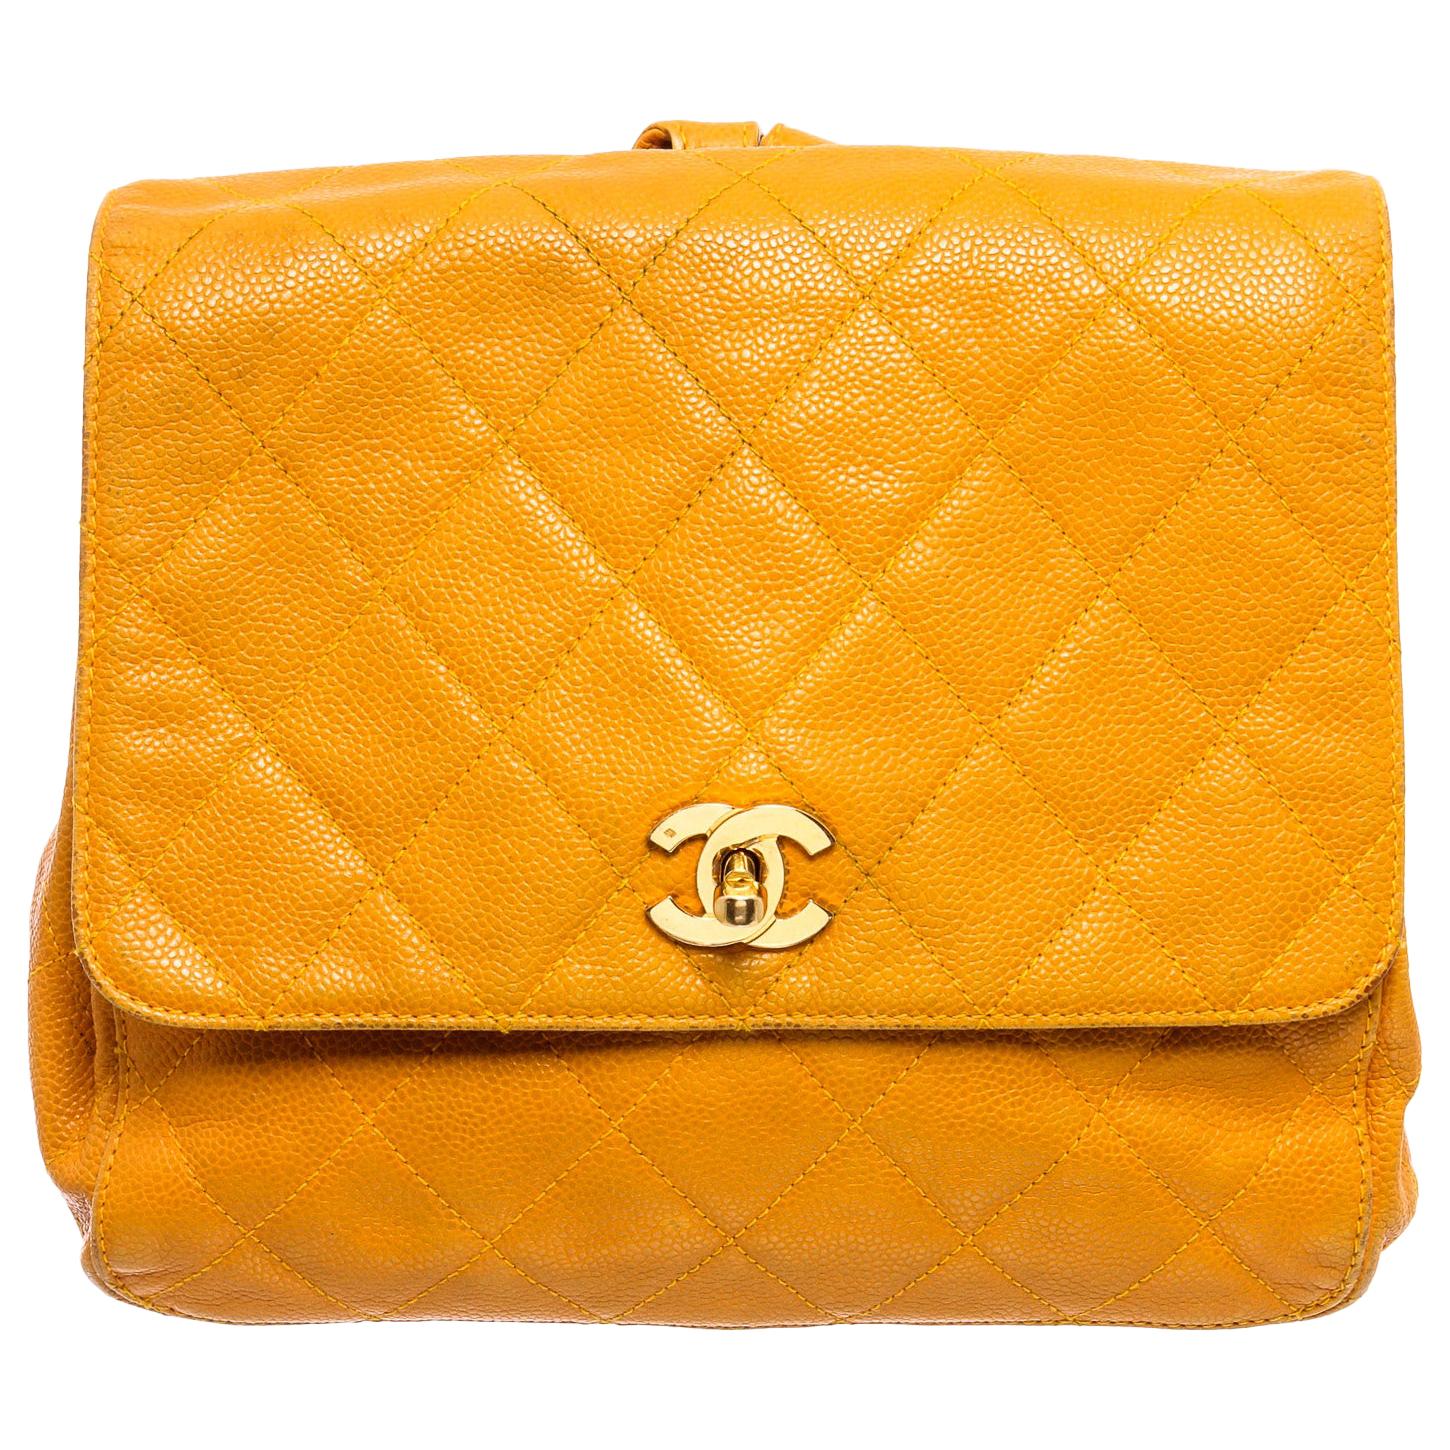 Chanel Yellow Quilted Caviar Leather CC Backpack